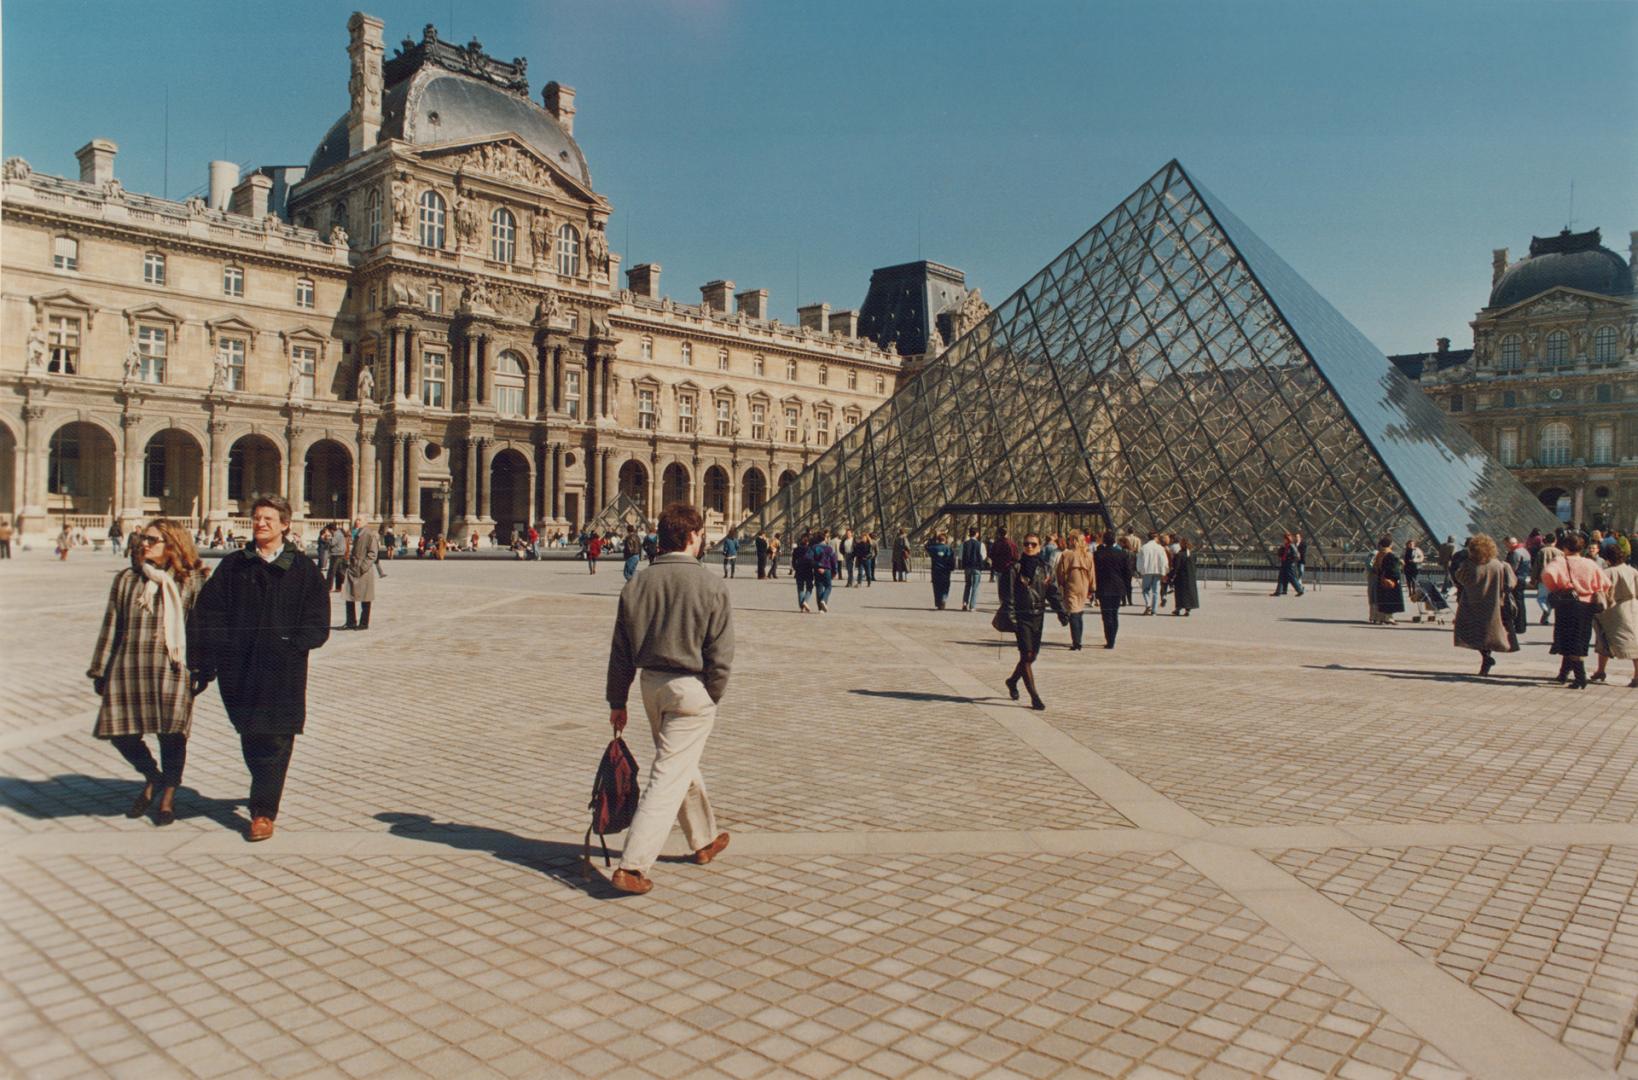 Ancient and modern: the Louvre and its controversial entrance